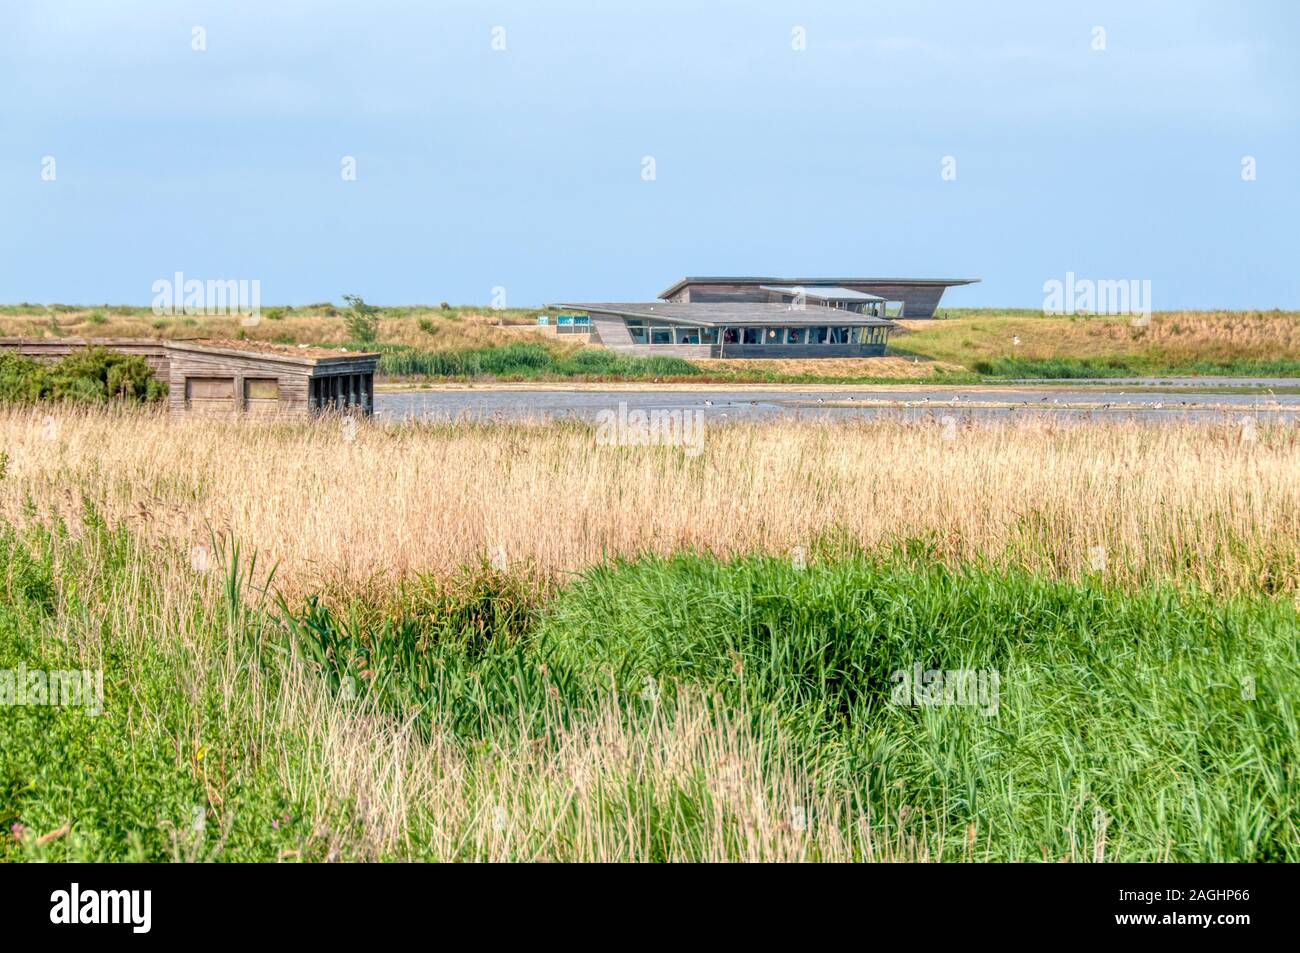 The South Parrinder Hide overlooking the Freshwater Marsh at RSPB Titchwell bird reserve. North Parrinder Hide in background & Island Hide to left. Stock Photo